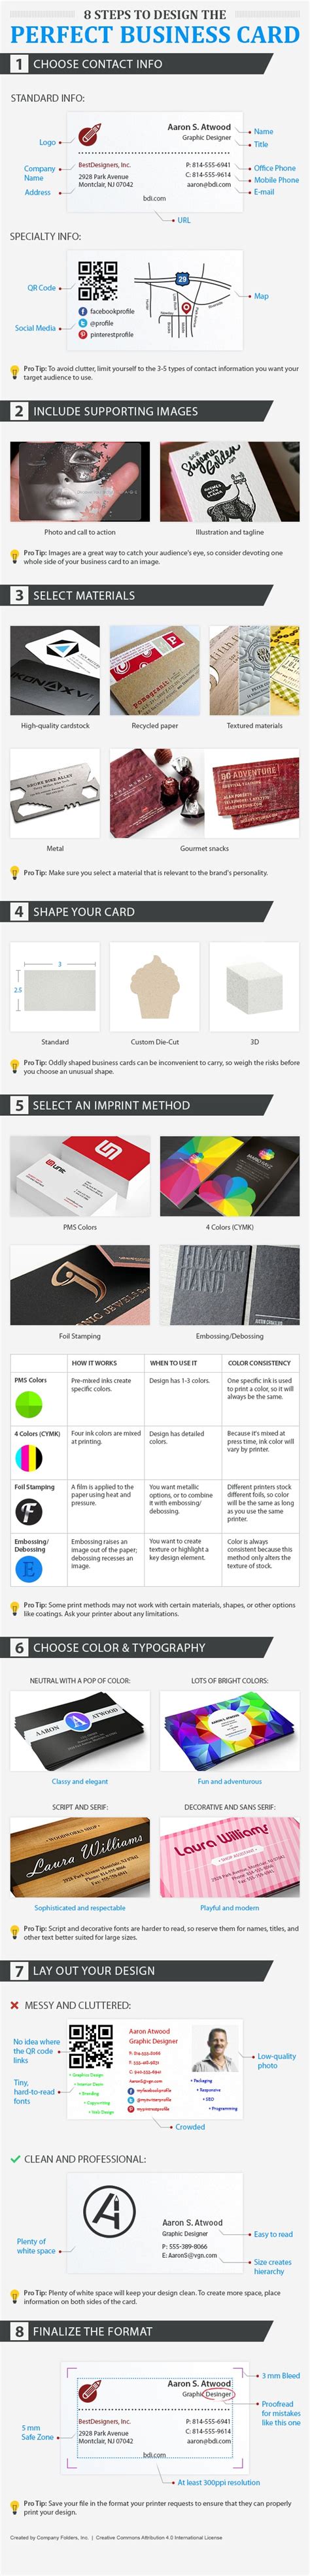 ideas  making  awesome business card